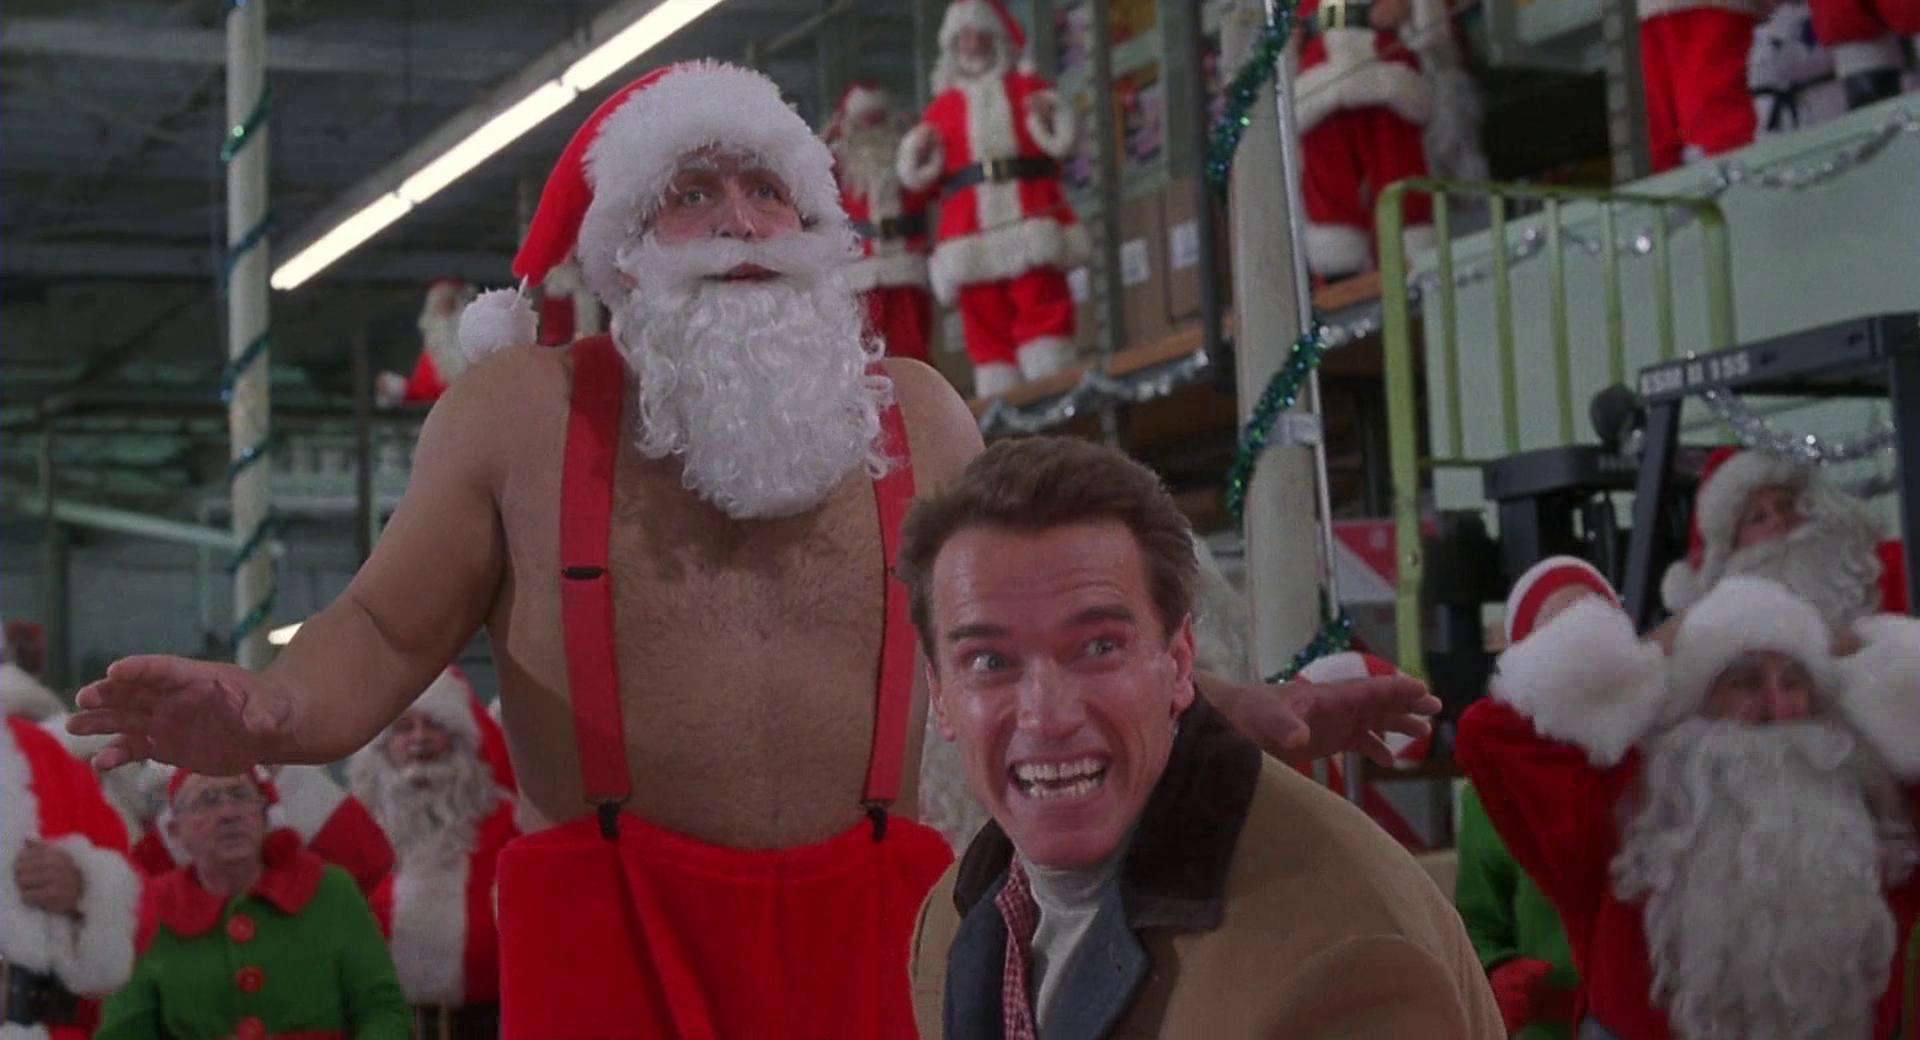 Arnold Schwarzenegger and a topless Santa in a store in this image from 1492 Pictures.